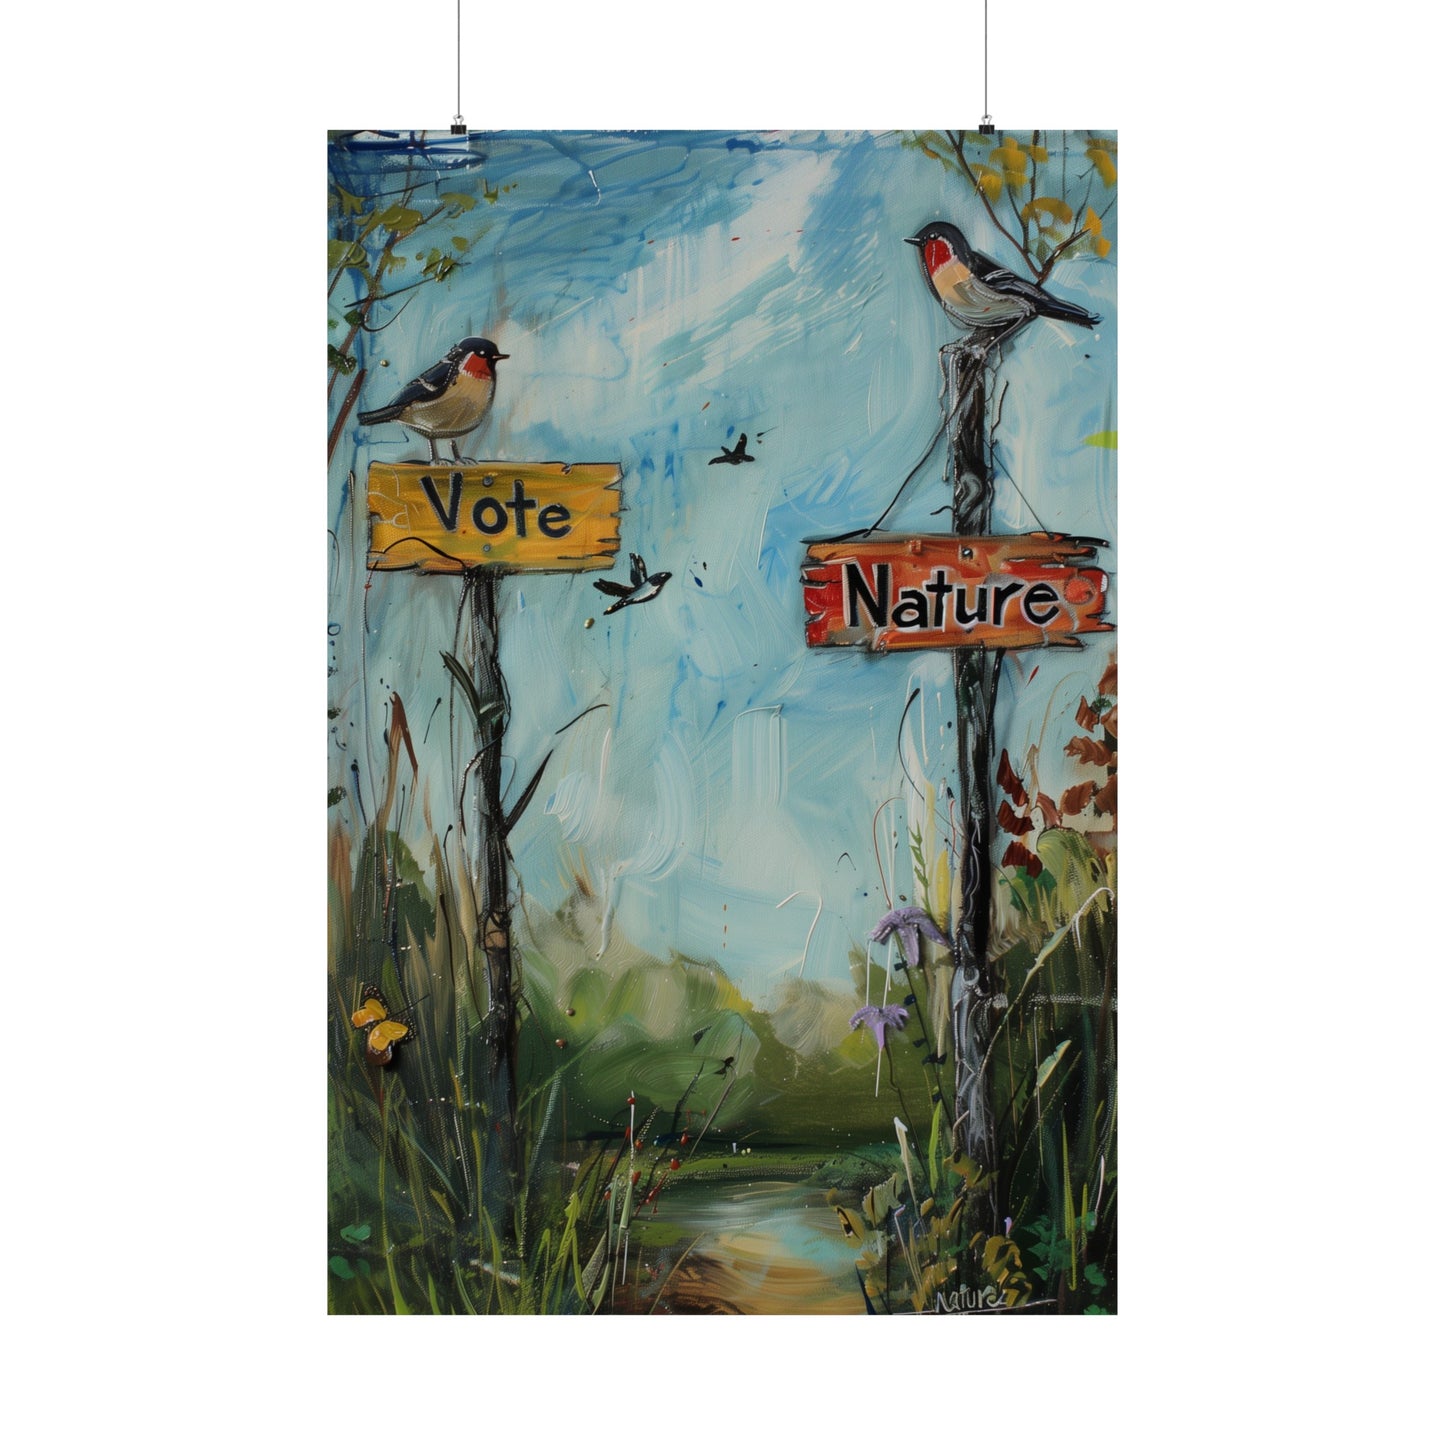 Vote Nature Matte Poster Environmentalism Political Wall Art for Home Office or Dorm Decor | Fine Art with a Purpose!